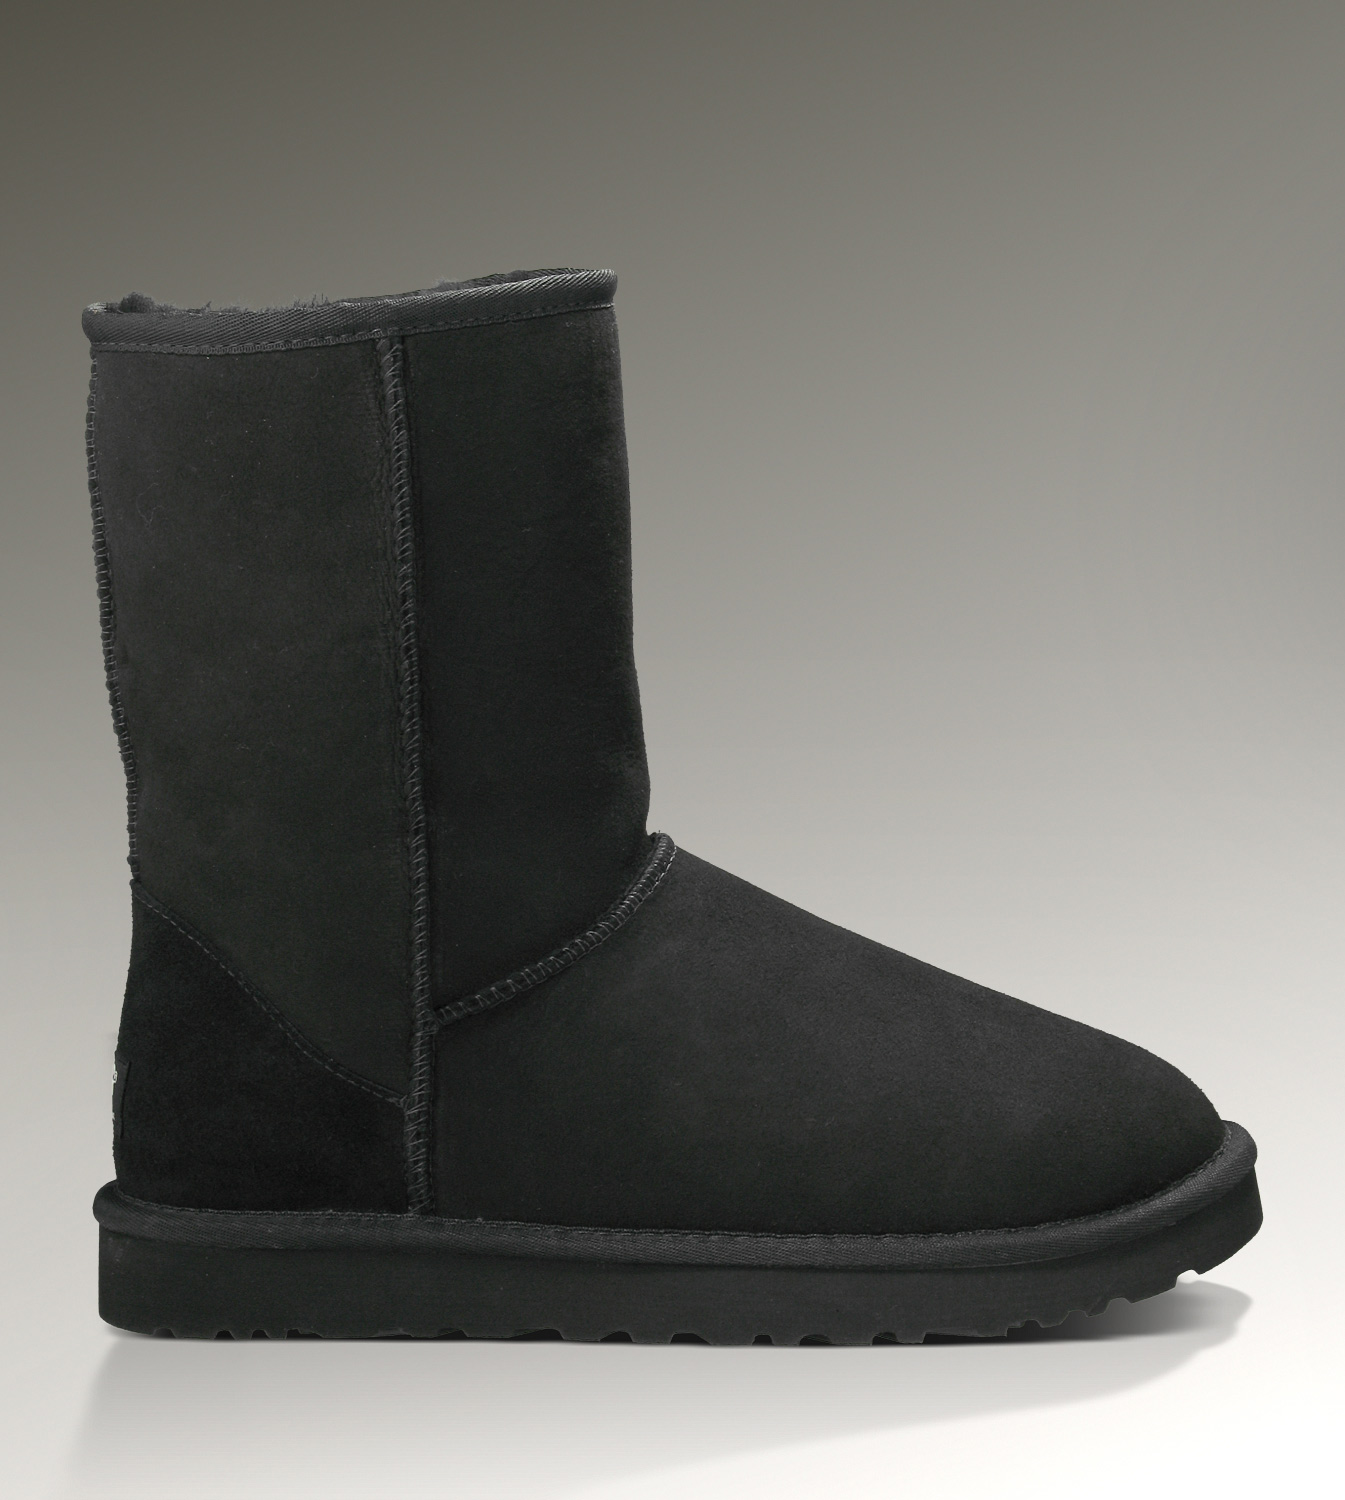 classic ugg boots on sale